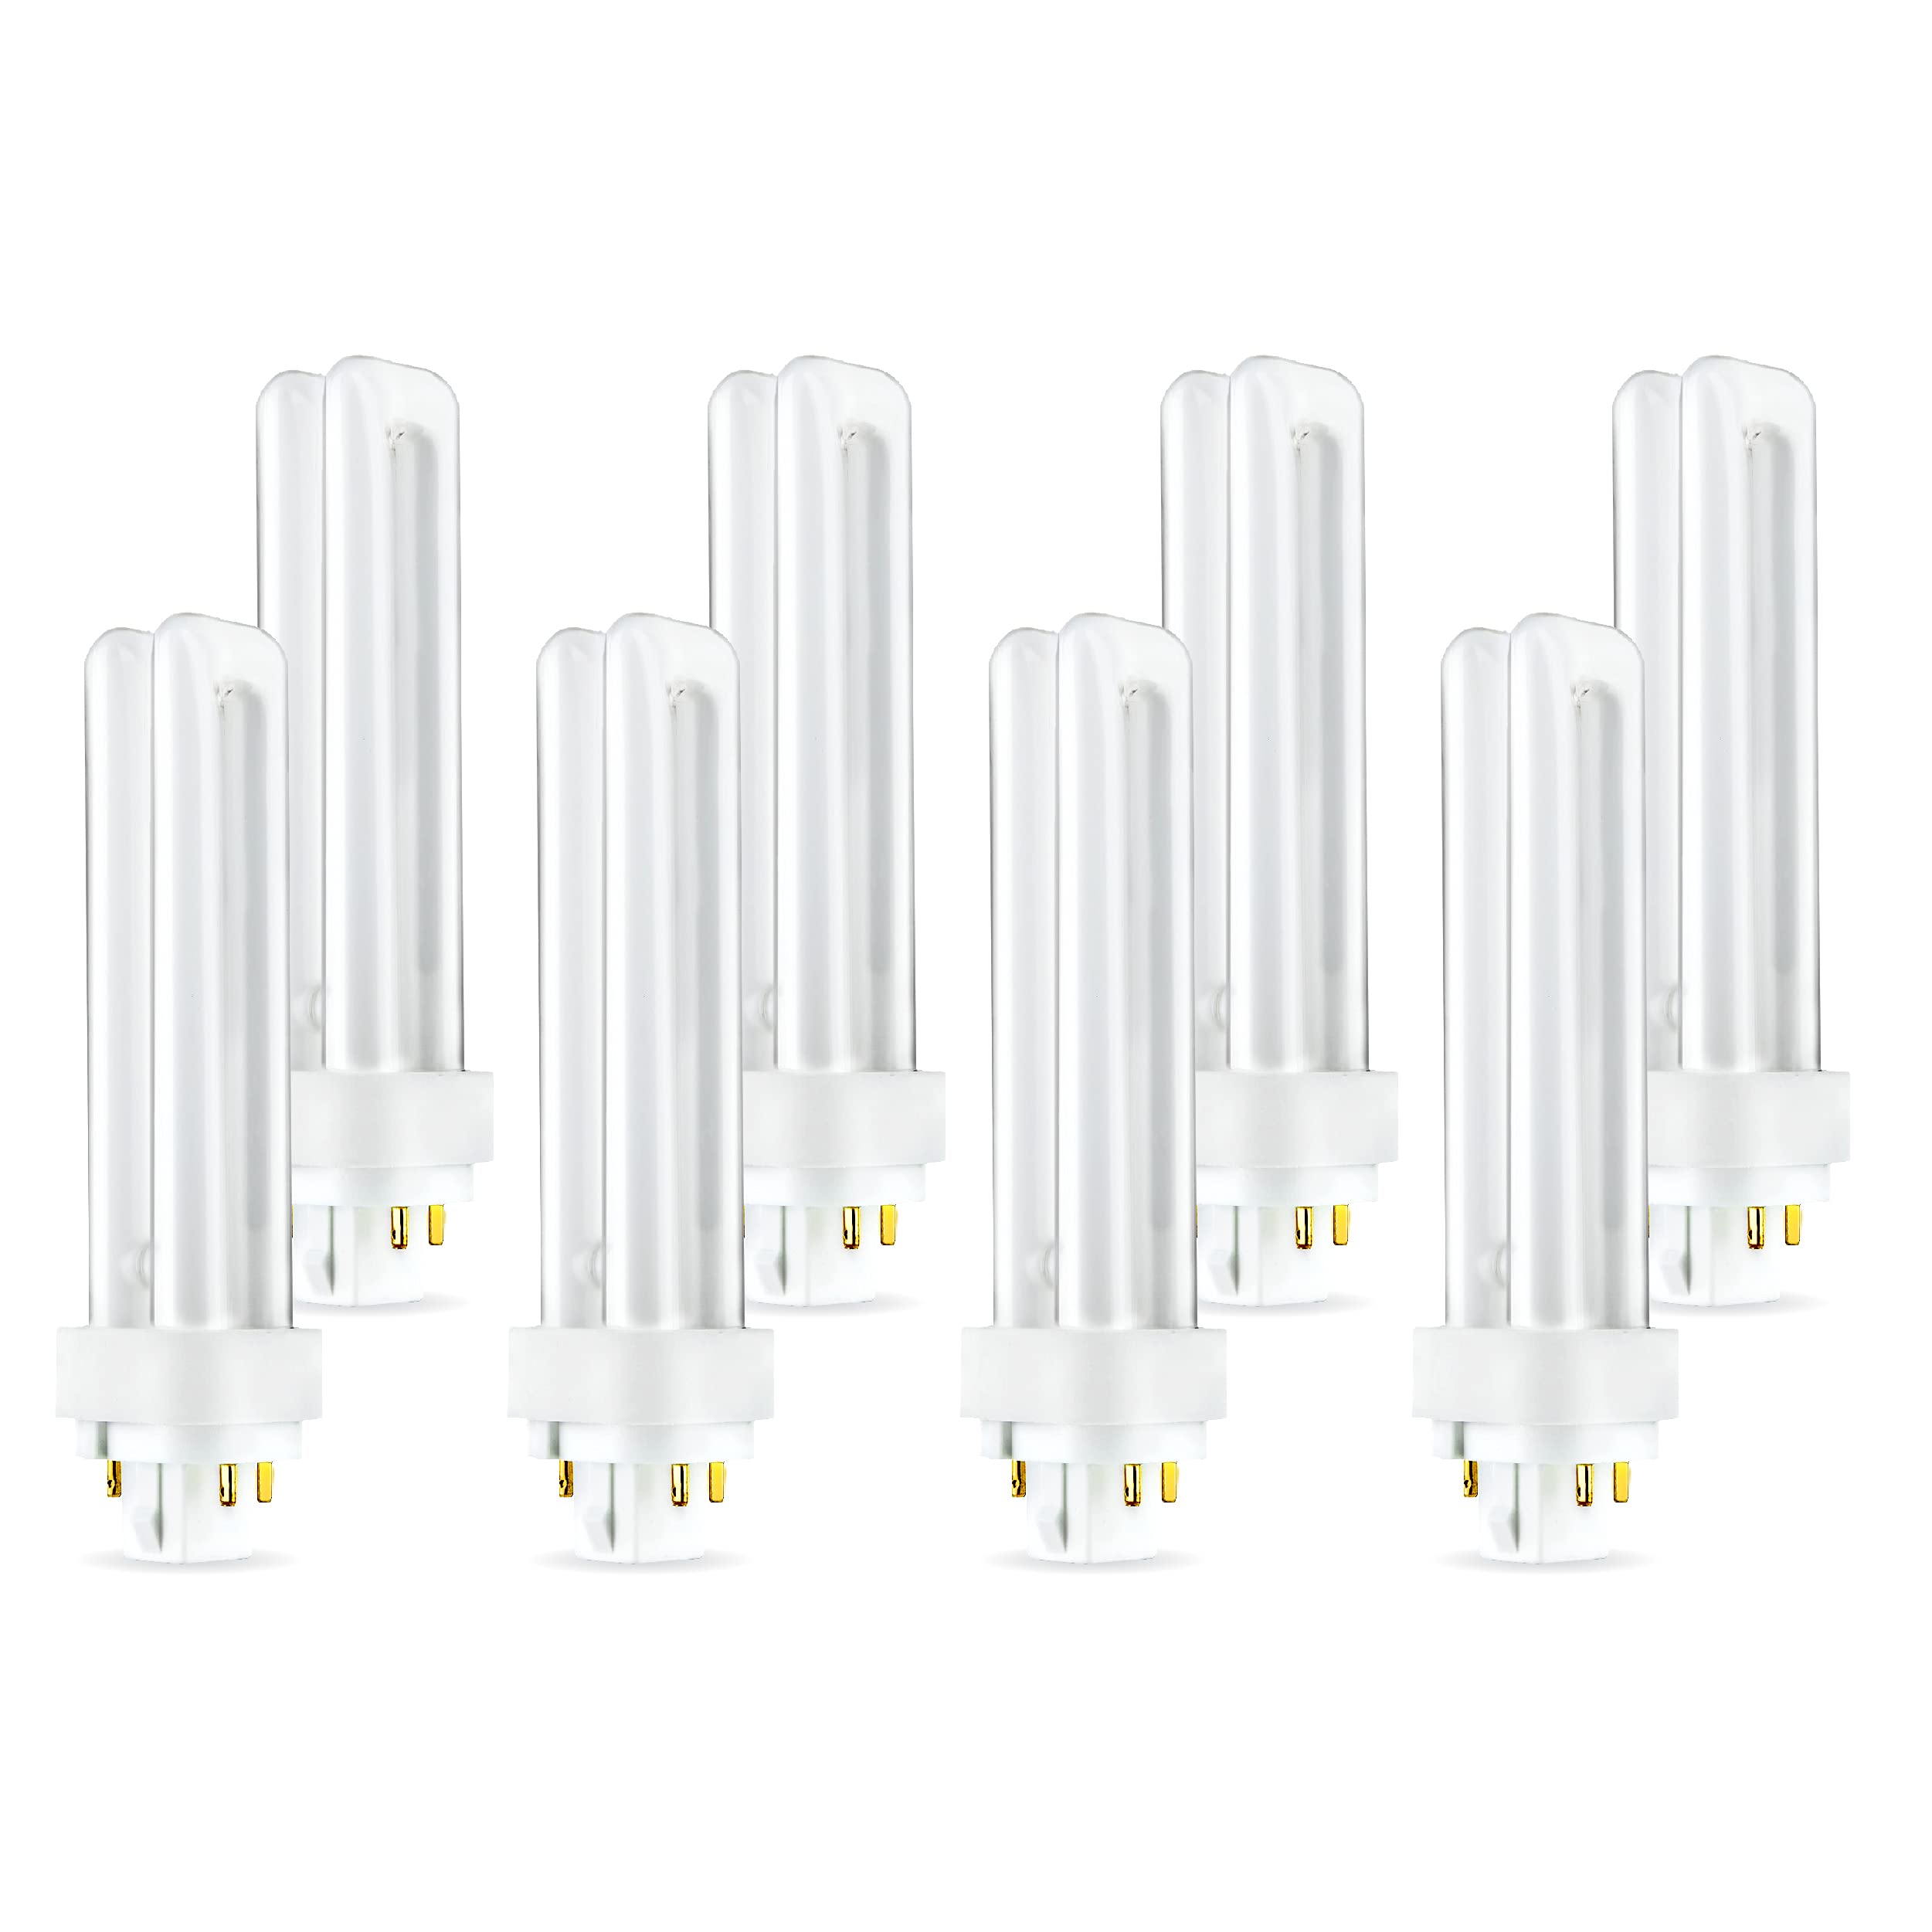 (8 Pack) PLC-13W 835, 4 Pin G24q-1, 13 Watt Double Tube, Compact Fluorescent Light Bulb, Replaces Philips 38327-3, GE 97596 and Sylvania 20671  - Acceptable